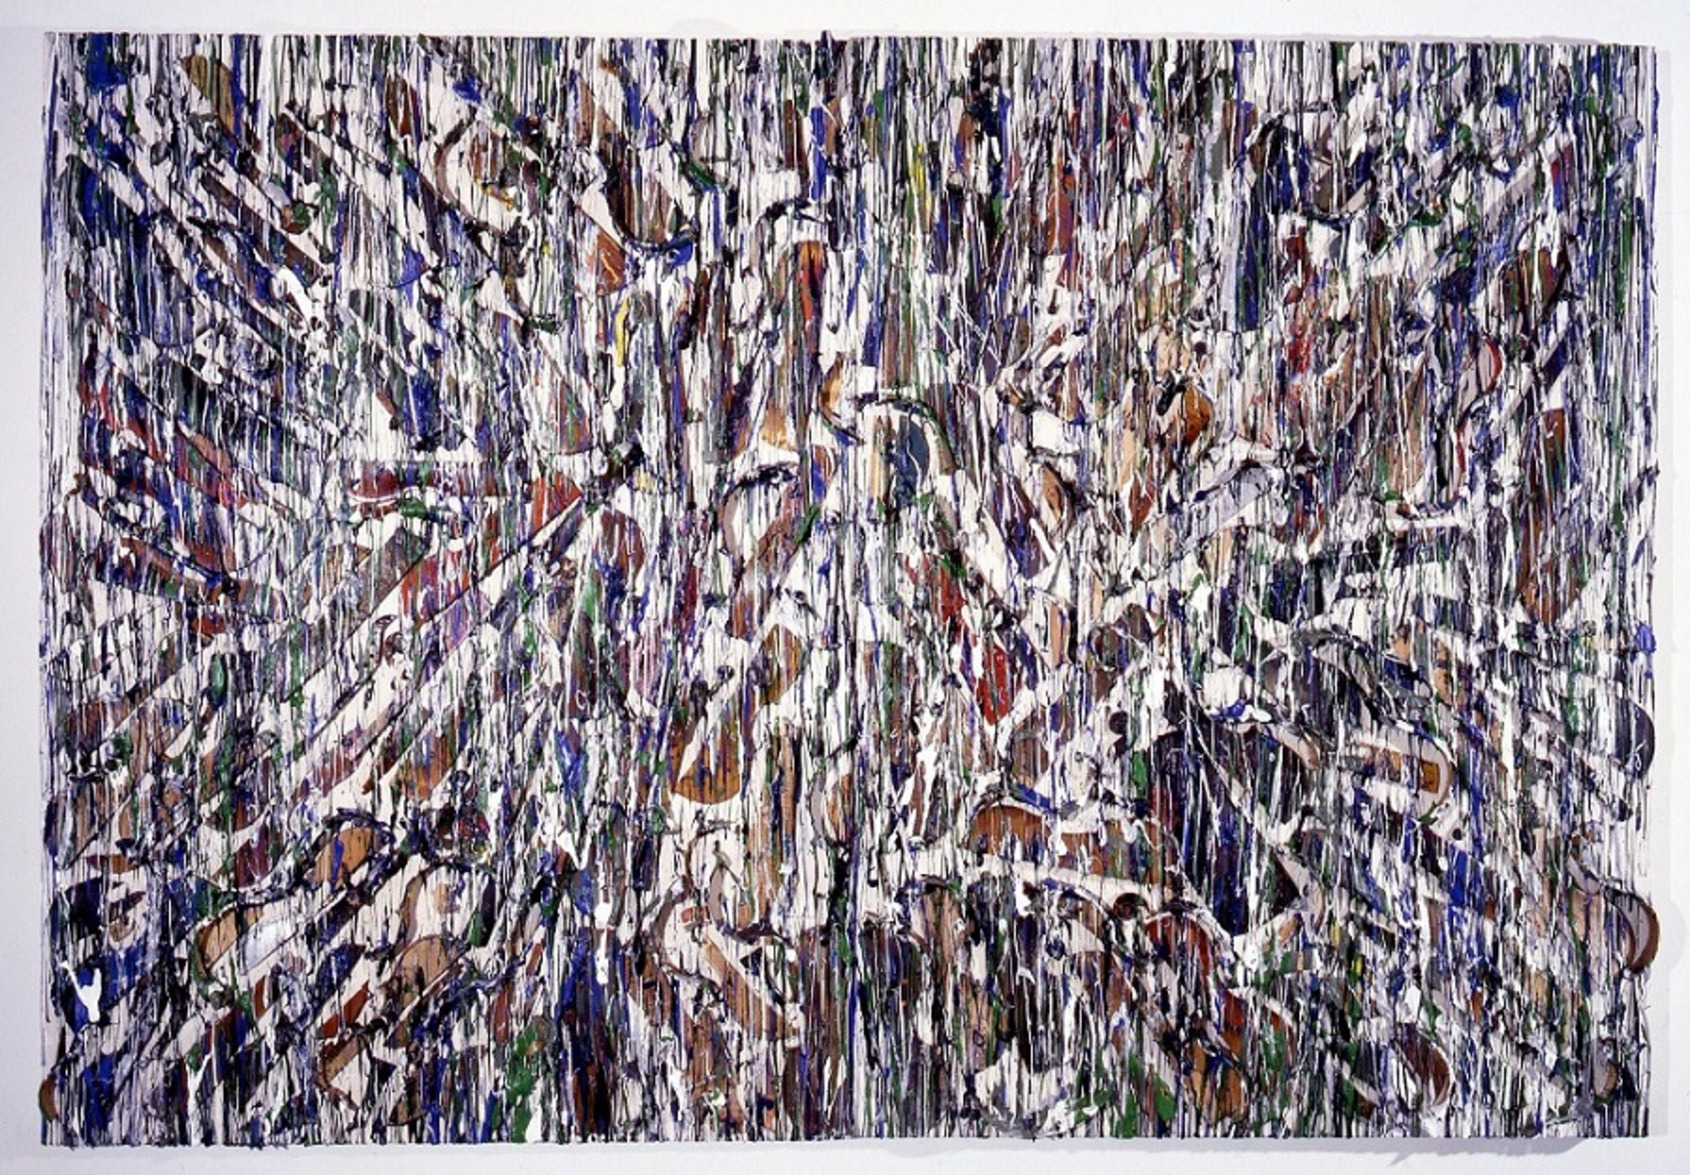 Austerlitz’s Sky, Arman, 1990, 182.9x269.2cm. Diptych - sliced violins and bows with acrylic paint on canvas. Colors:permanent green light, mars black, chrome oxide green, cobalt blue, ultraarine blue, silver, titanium white. Courtesy of The Arman Marital Trust.